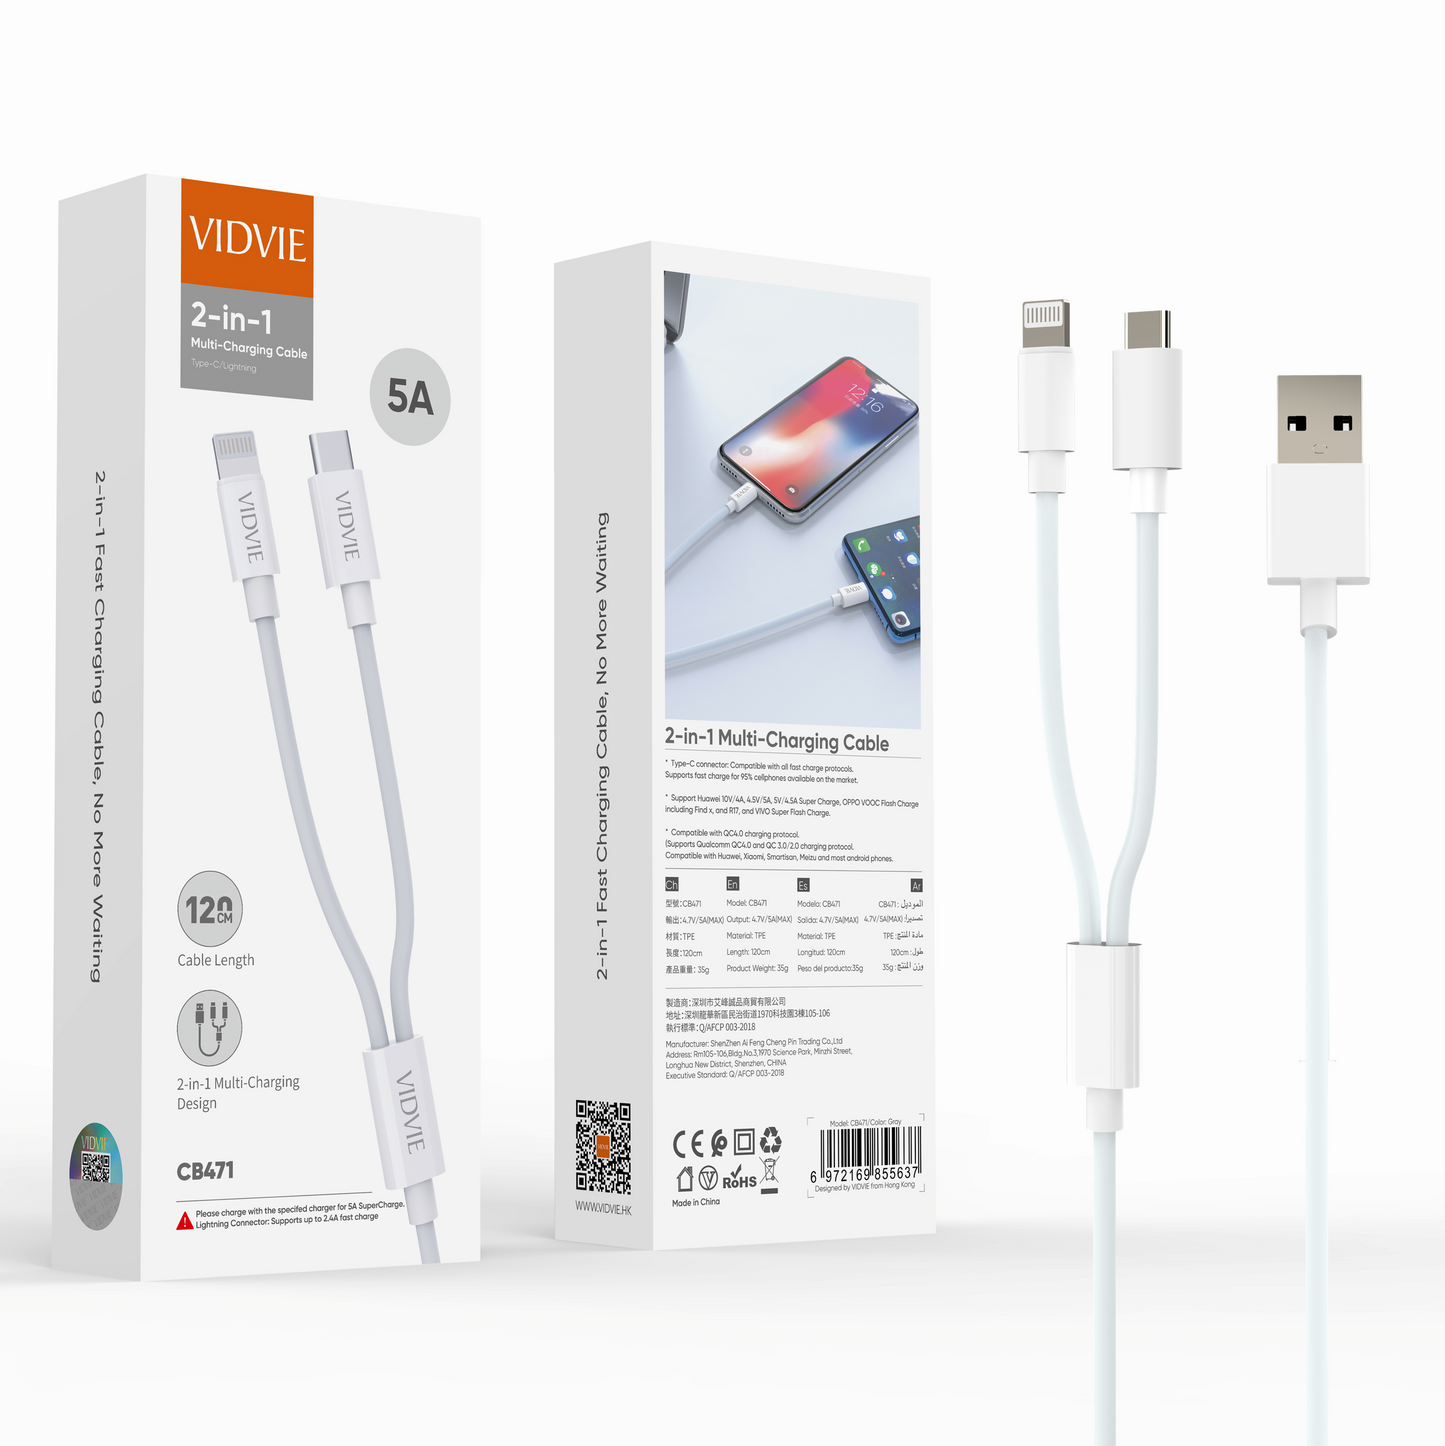 Fast Charging 2 in 1 Multi Charging Cable USB Type C & Apple Lightning Connector Universal for iPhone iPad Android Samsung Galaxy Pixel OnePlus Sony